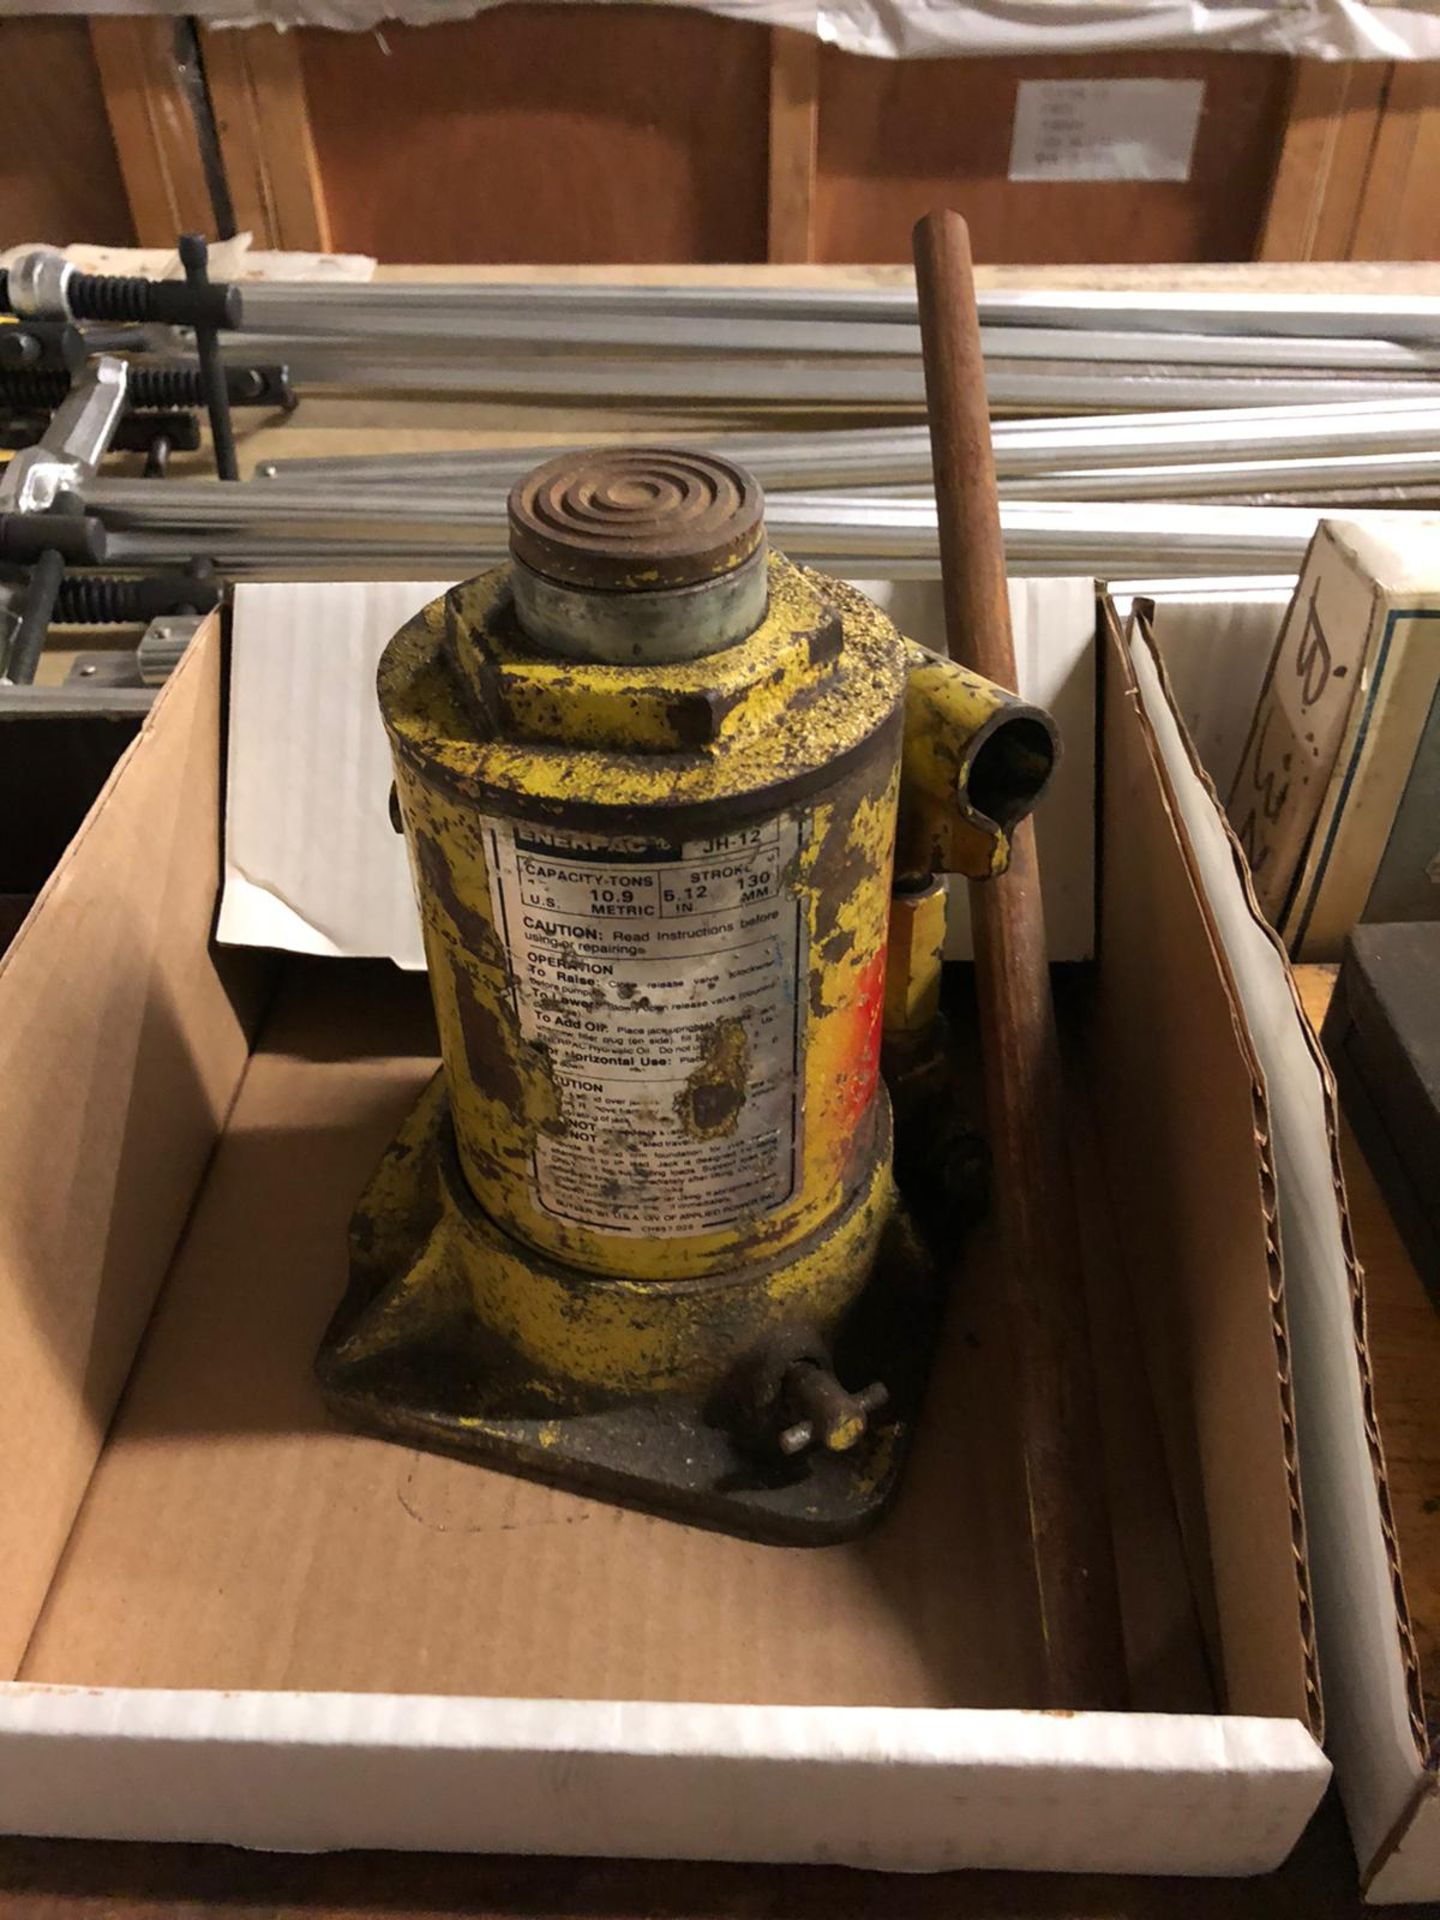 Enerpac JH-12 Hydraulic Cylinder Jack 10.9 Metric Tons with 5.12" stroke - Image 2 of 2